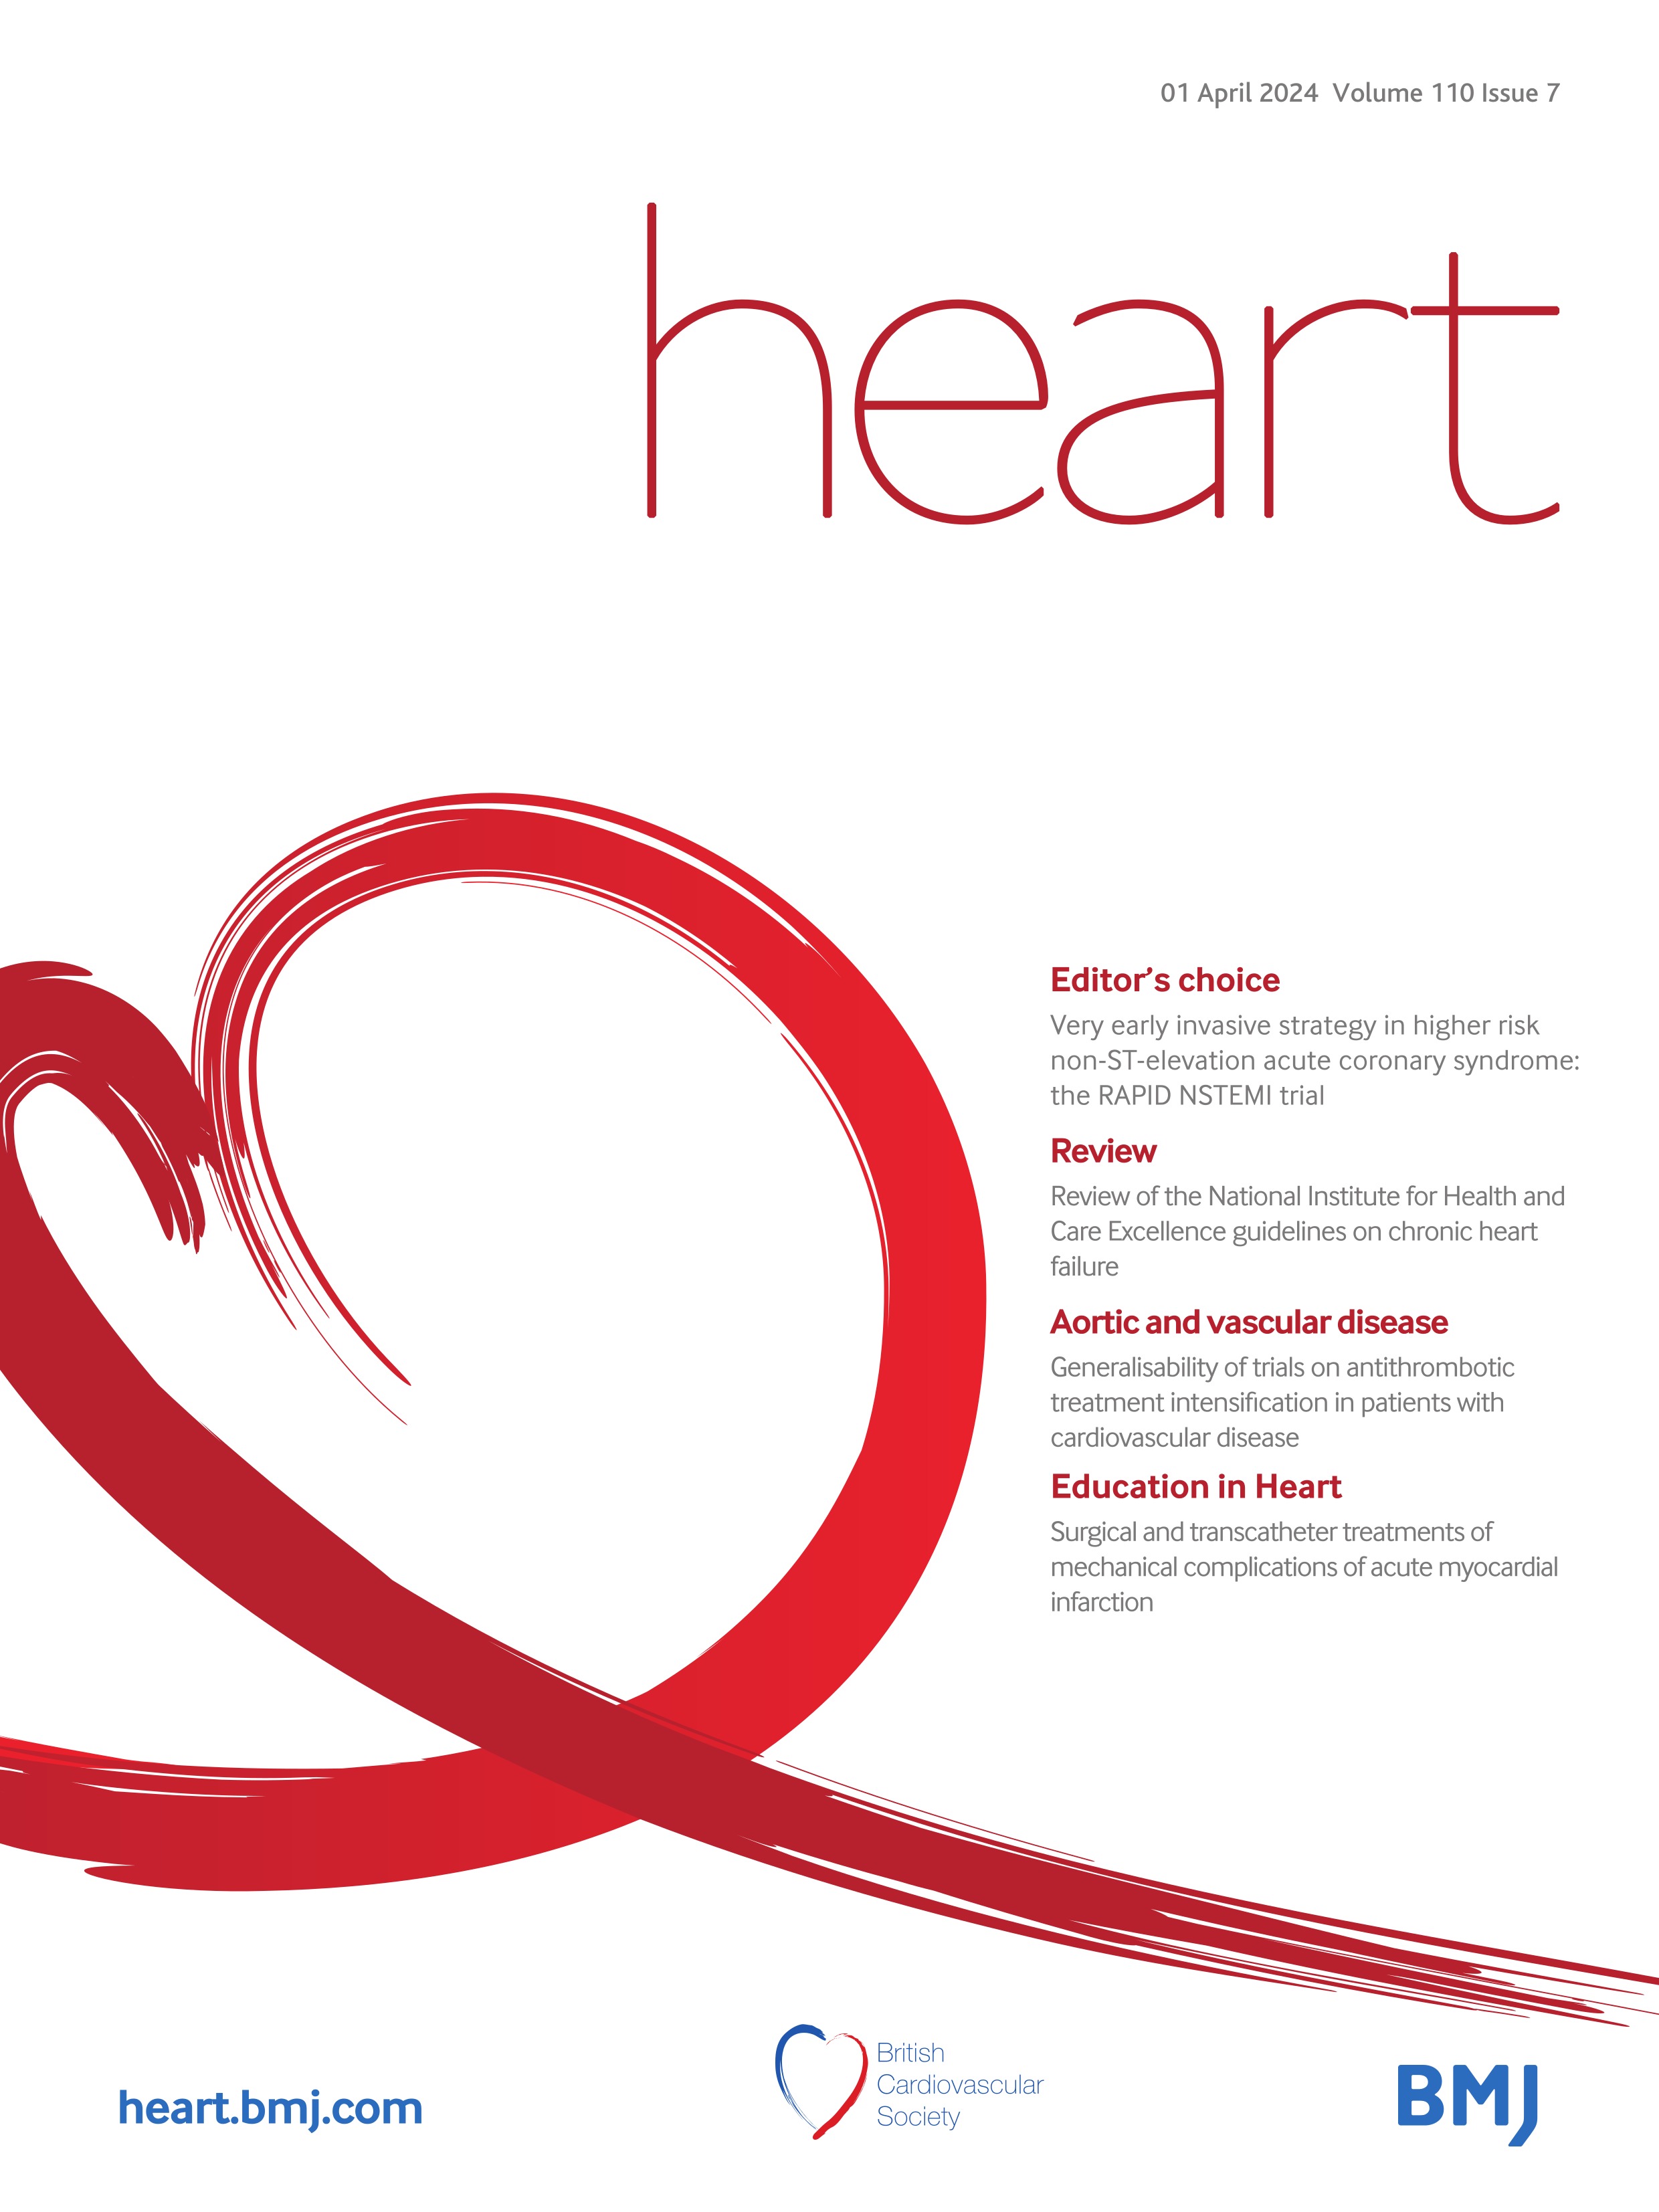 Novel uses for implanted haemodynamic monitoring in adults with subaortic right ventricles